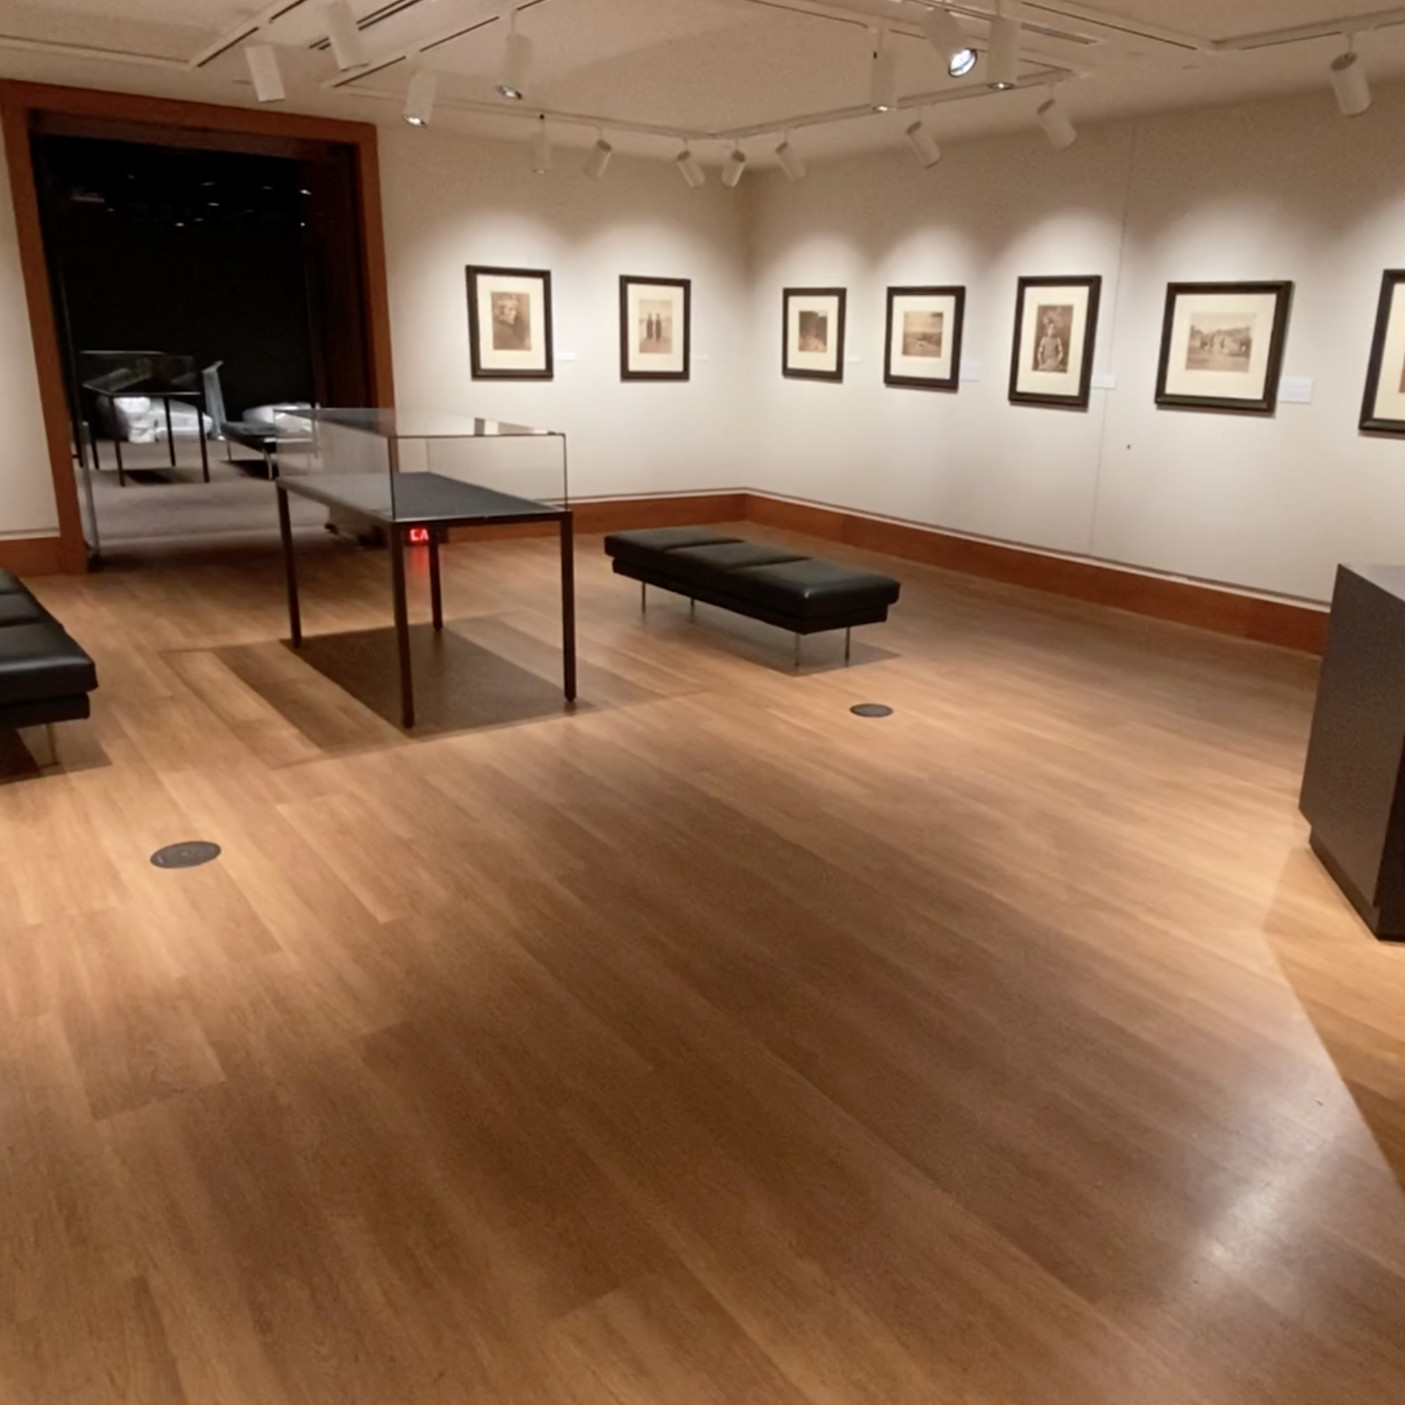 Photo of the Curtis gallery